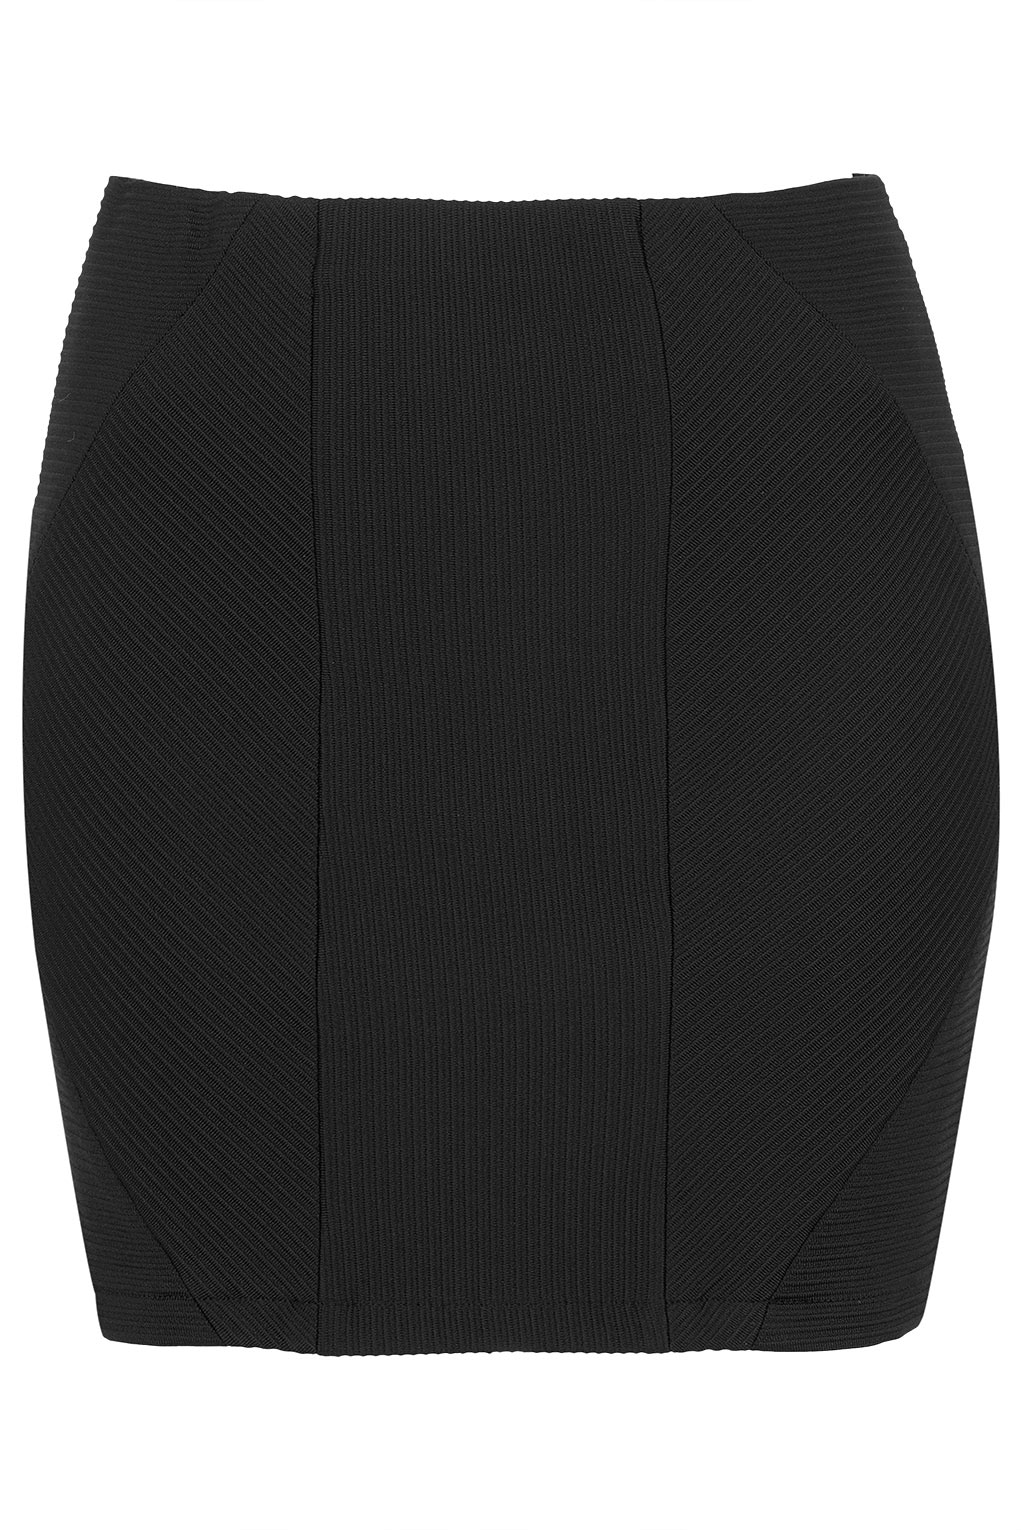 TOPSHOP Ribbed Panel Bodycon Skirt in Black - Lyst